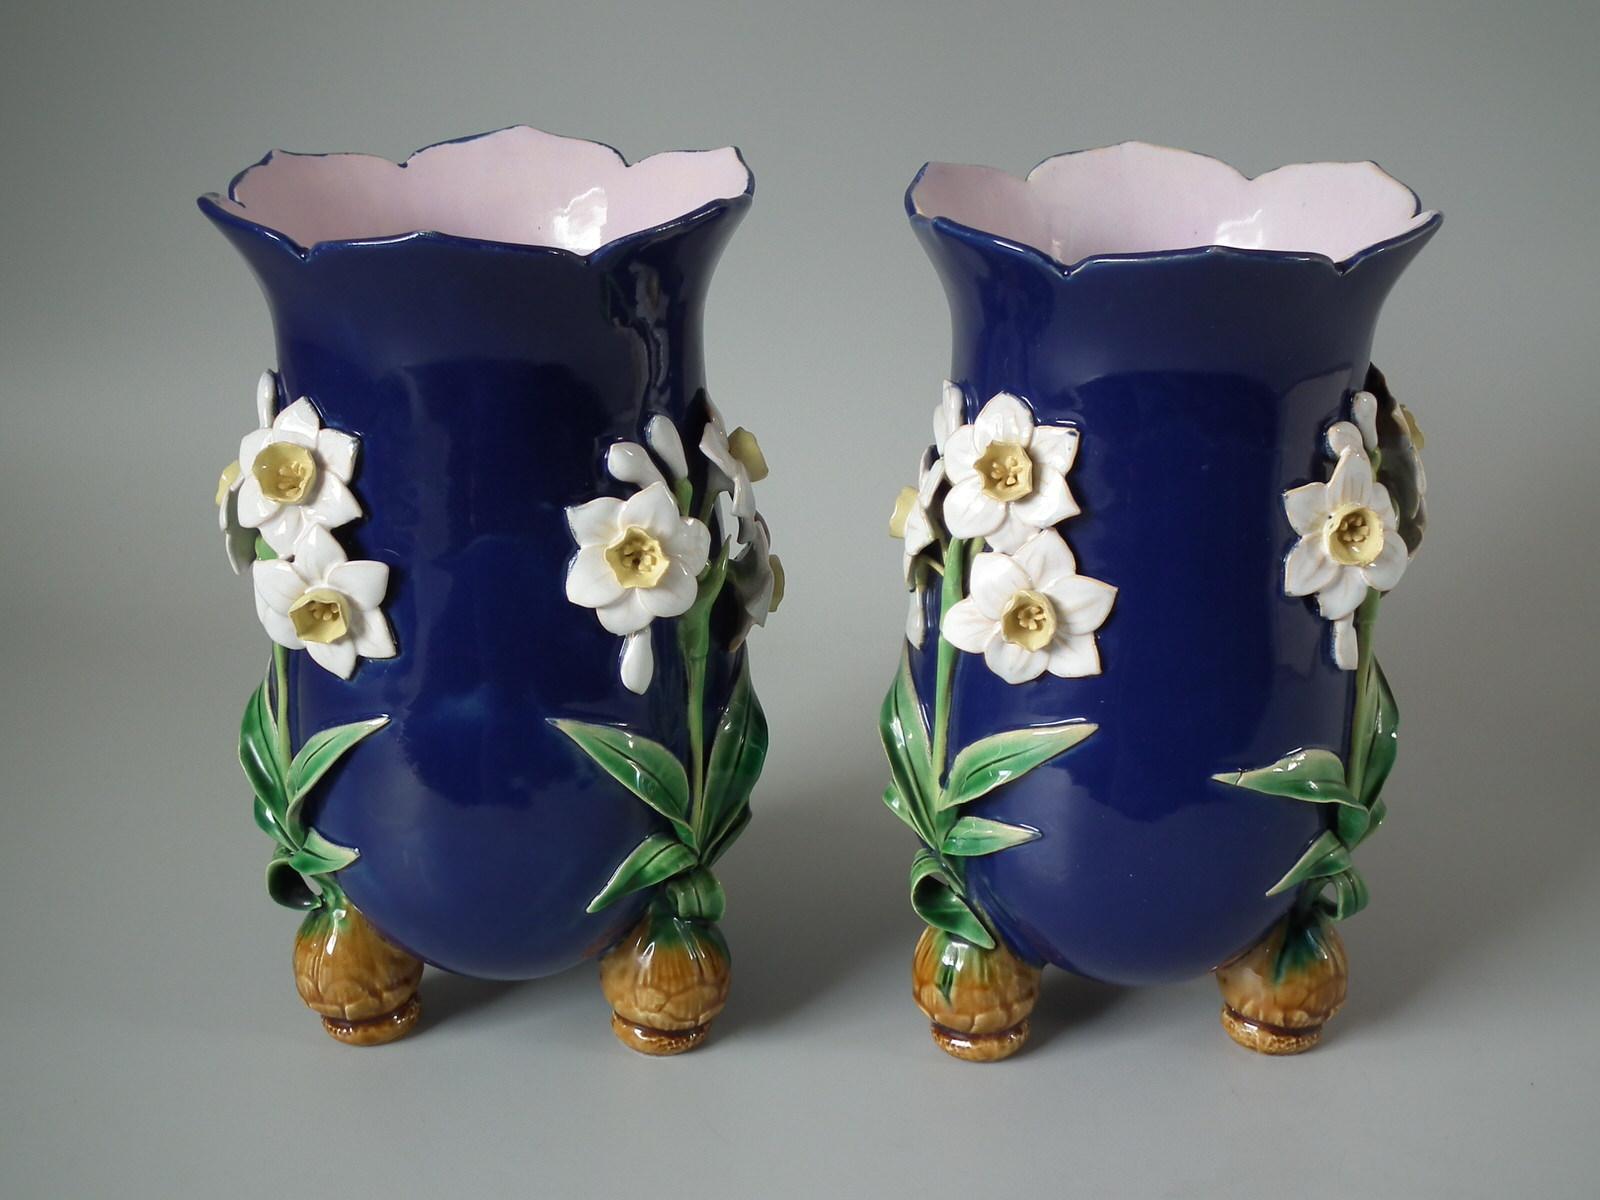 Pair of Minton Majolica vases which feature daffodils stood on bulb feet. Cobalt blue ground version. Colouration: cobalt blue, green, white, are predominant. The piece bears maker's marks for the Minton pottery. Bears a pattern number, '1200'.